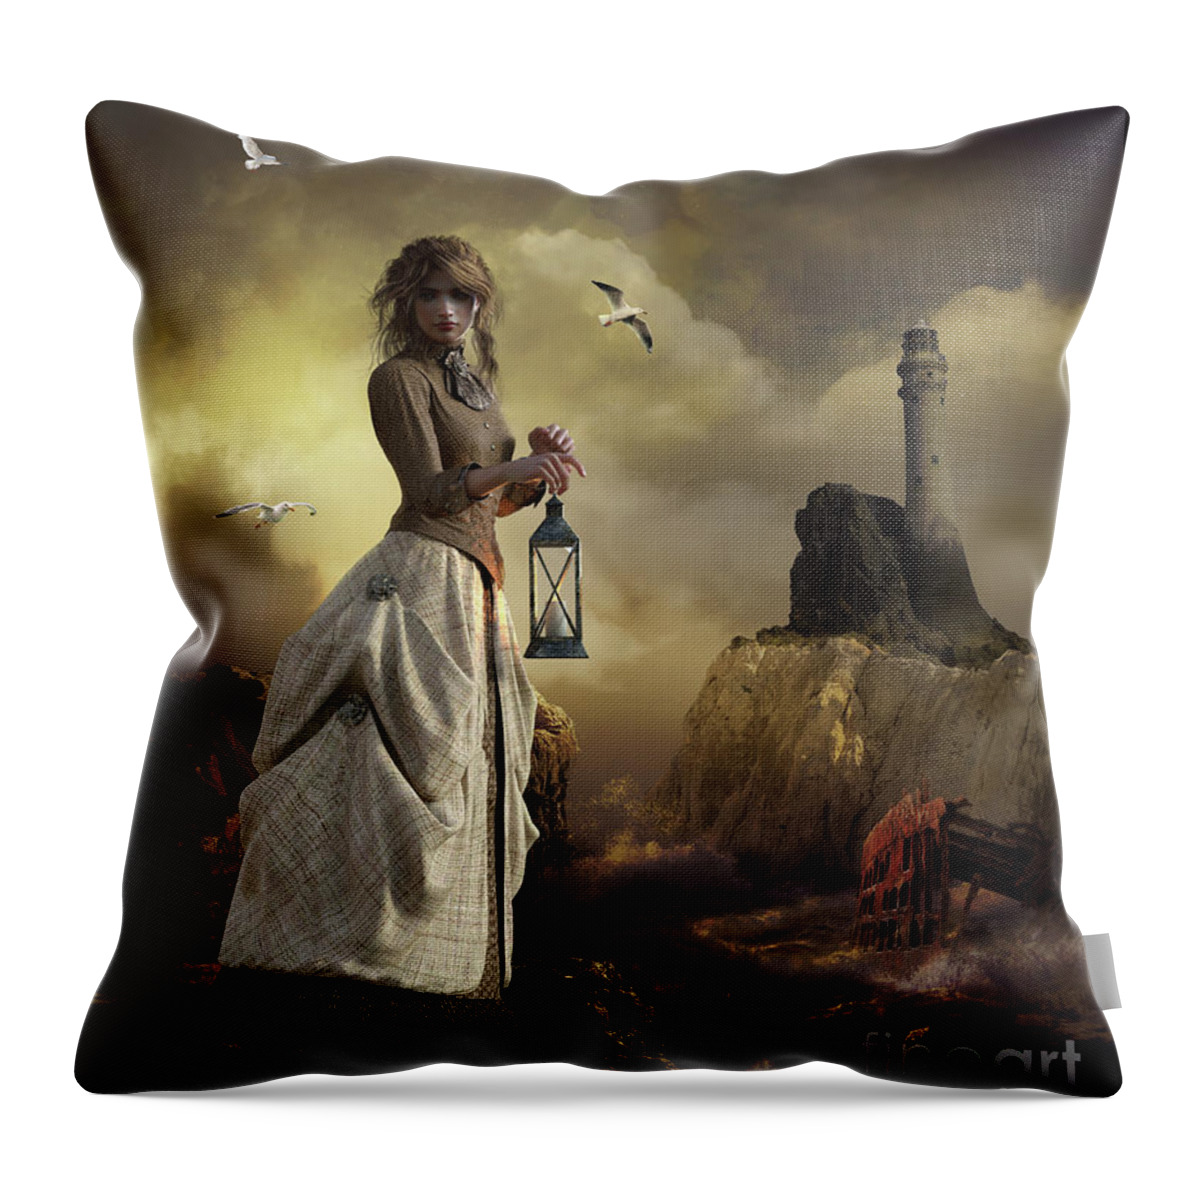 Lighthouse Keepers Daughter Throw Pillow featuring the digital art The Lighthouse Keeper's Daughter by Shanina Conway